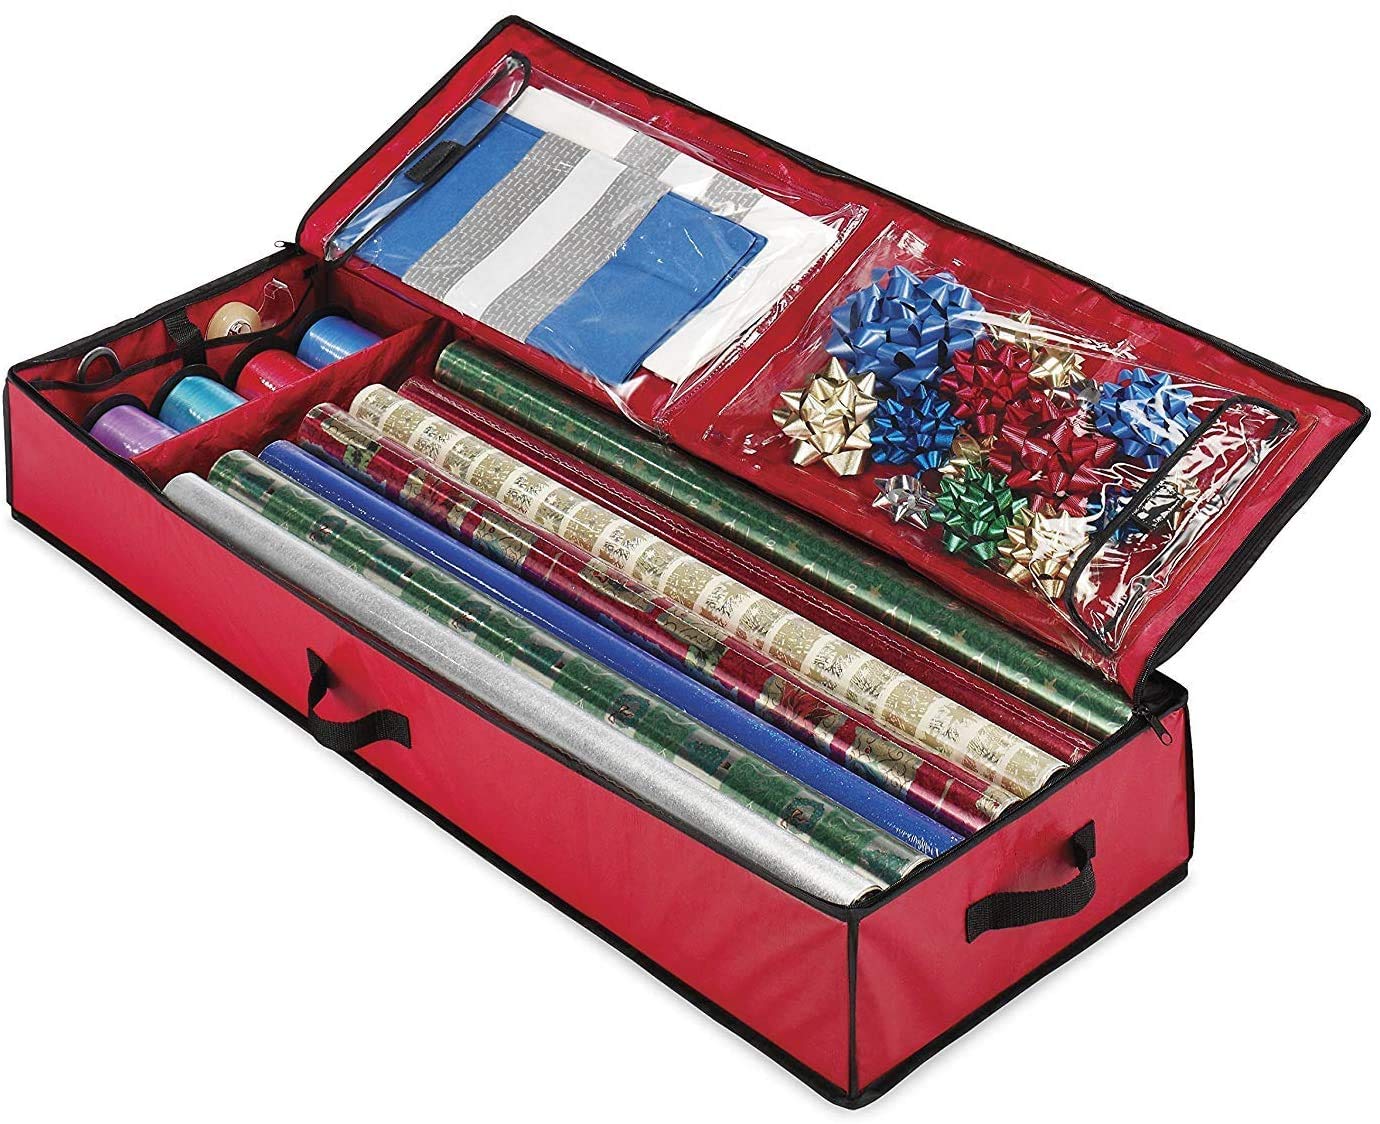 Christmas Storage Organizer � Spacious Under-bed Holiday Wrapping Paper Container �Perfect for Gift Wrap, Bags, Ribbons, Bows, Cards, Wrapping Supplies and Many More  - Very Good